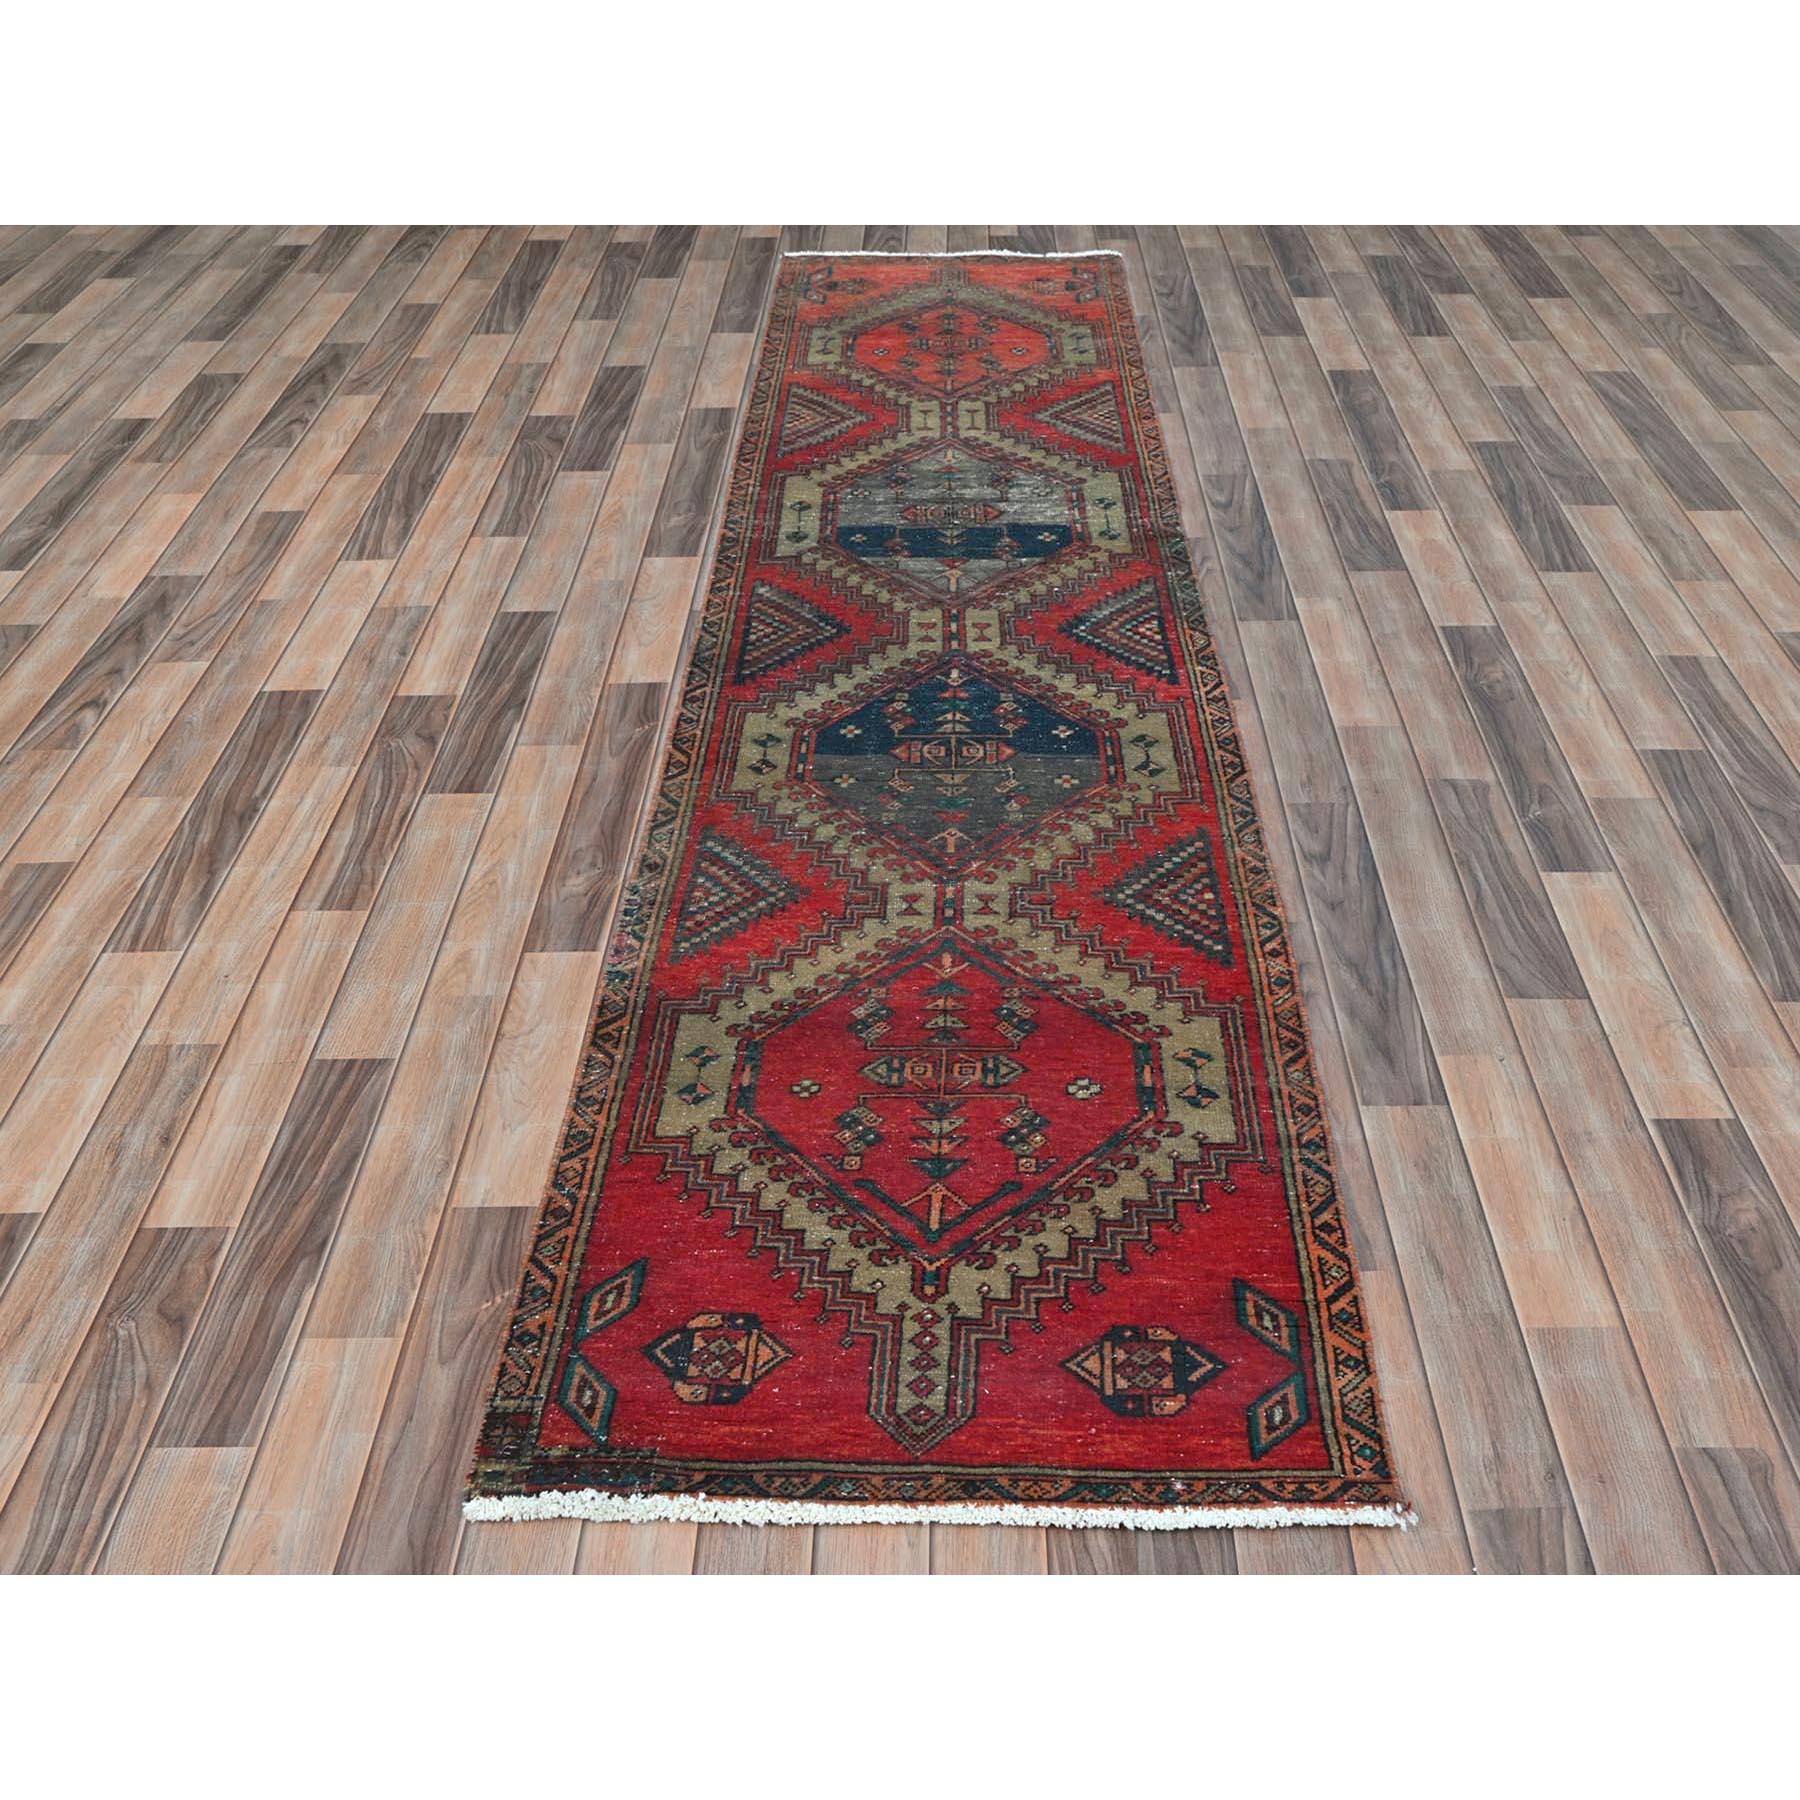 This fabulous Hand-Knotted carpet has been created and designed for extra strength and durability. This rug has been handcrafted for weeks in the traditional method that is used to make
Exact rug size in feet and inches : 2'6